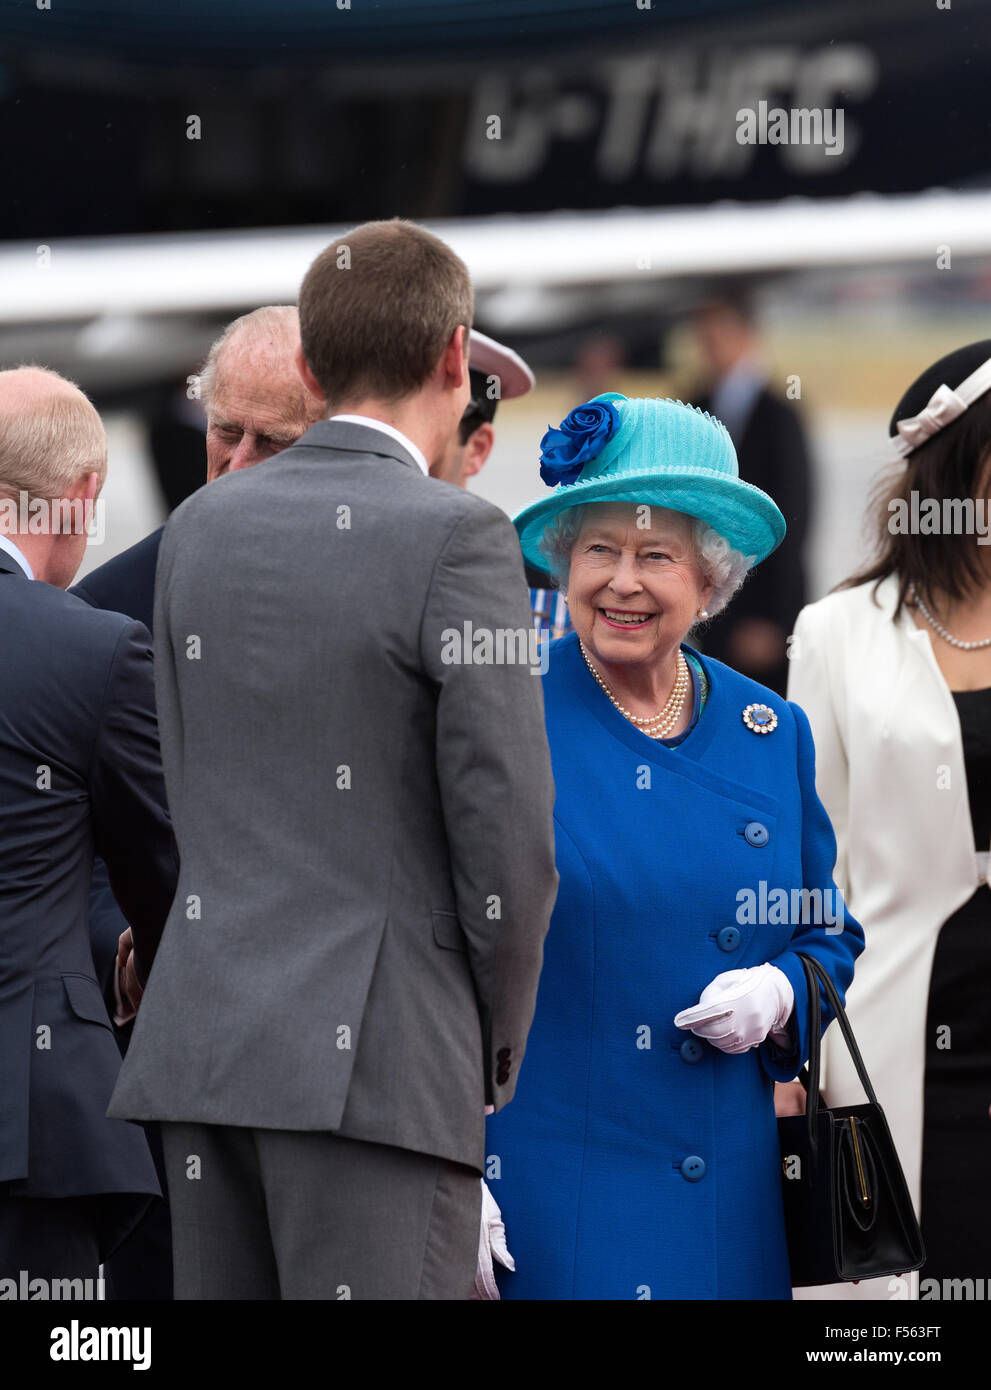 23.06.2015, Berlin, Berlin, Germany - Military part of Berlin's Tegel Airport. State visit of Queen Elizabeth II. In Germany. The monarch himself traveled in royal blue, with turquoise velvet hat dark blue flower. EBS150623D001CAROEX.JPG - NOT for SALE in G E R M A N Y, A U S T R I A, S W I T Z E R L A N D [MODEL RELEASE: NO, PROPERTY RELEASE: NO (c) caro photo agency / Schulz, http://www.caro-images.pl, info@carofoto.pl - In case of using the picture for non-journalistic purposes, please contact the agency - the picture is subject to royalty!] Stock Photo